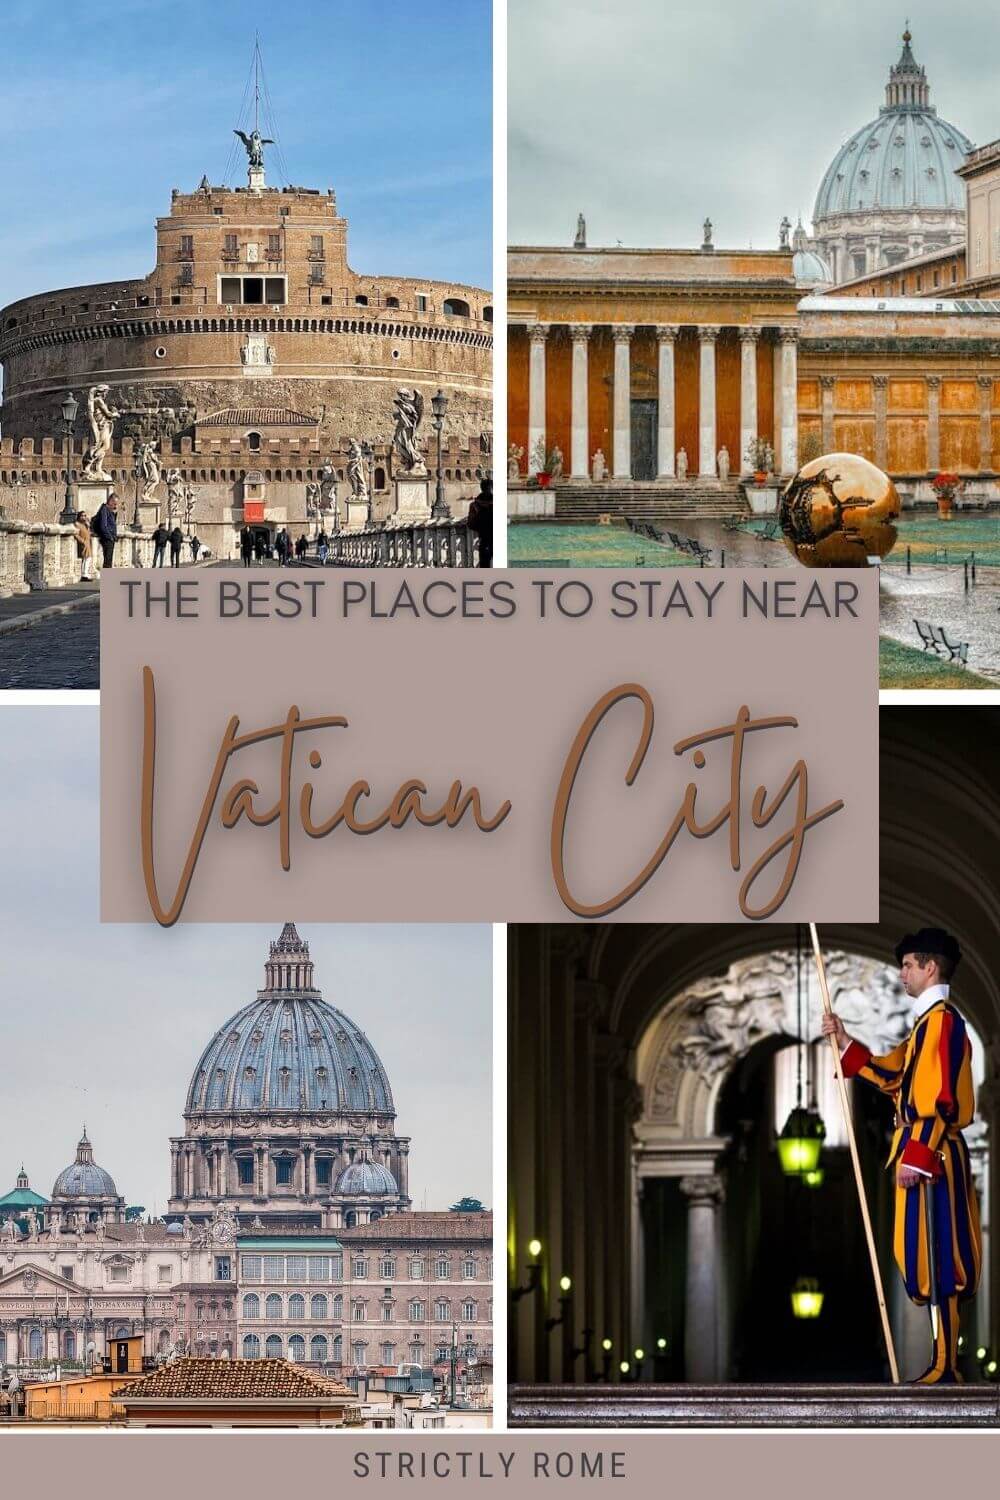 Check out this selection of hotels near Vatican City - via @strictlyrome